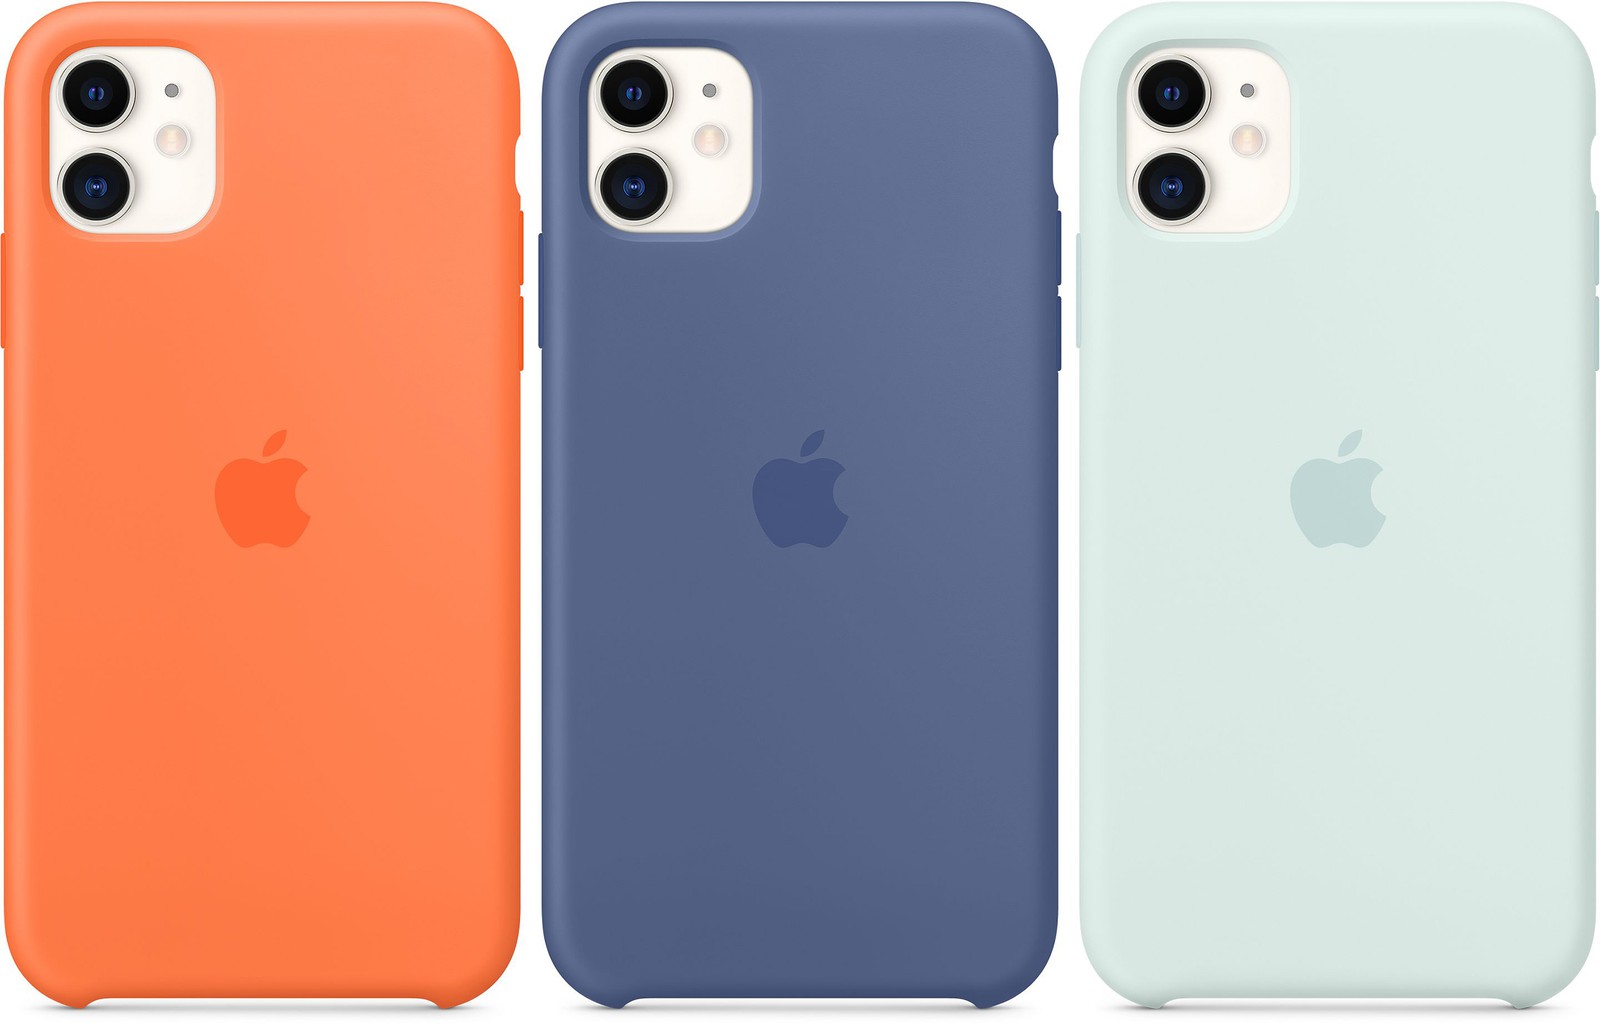 Apple might also supplant silicone accessories with eco-friendlier variants